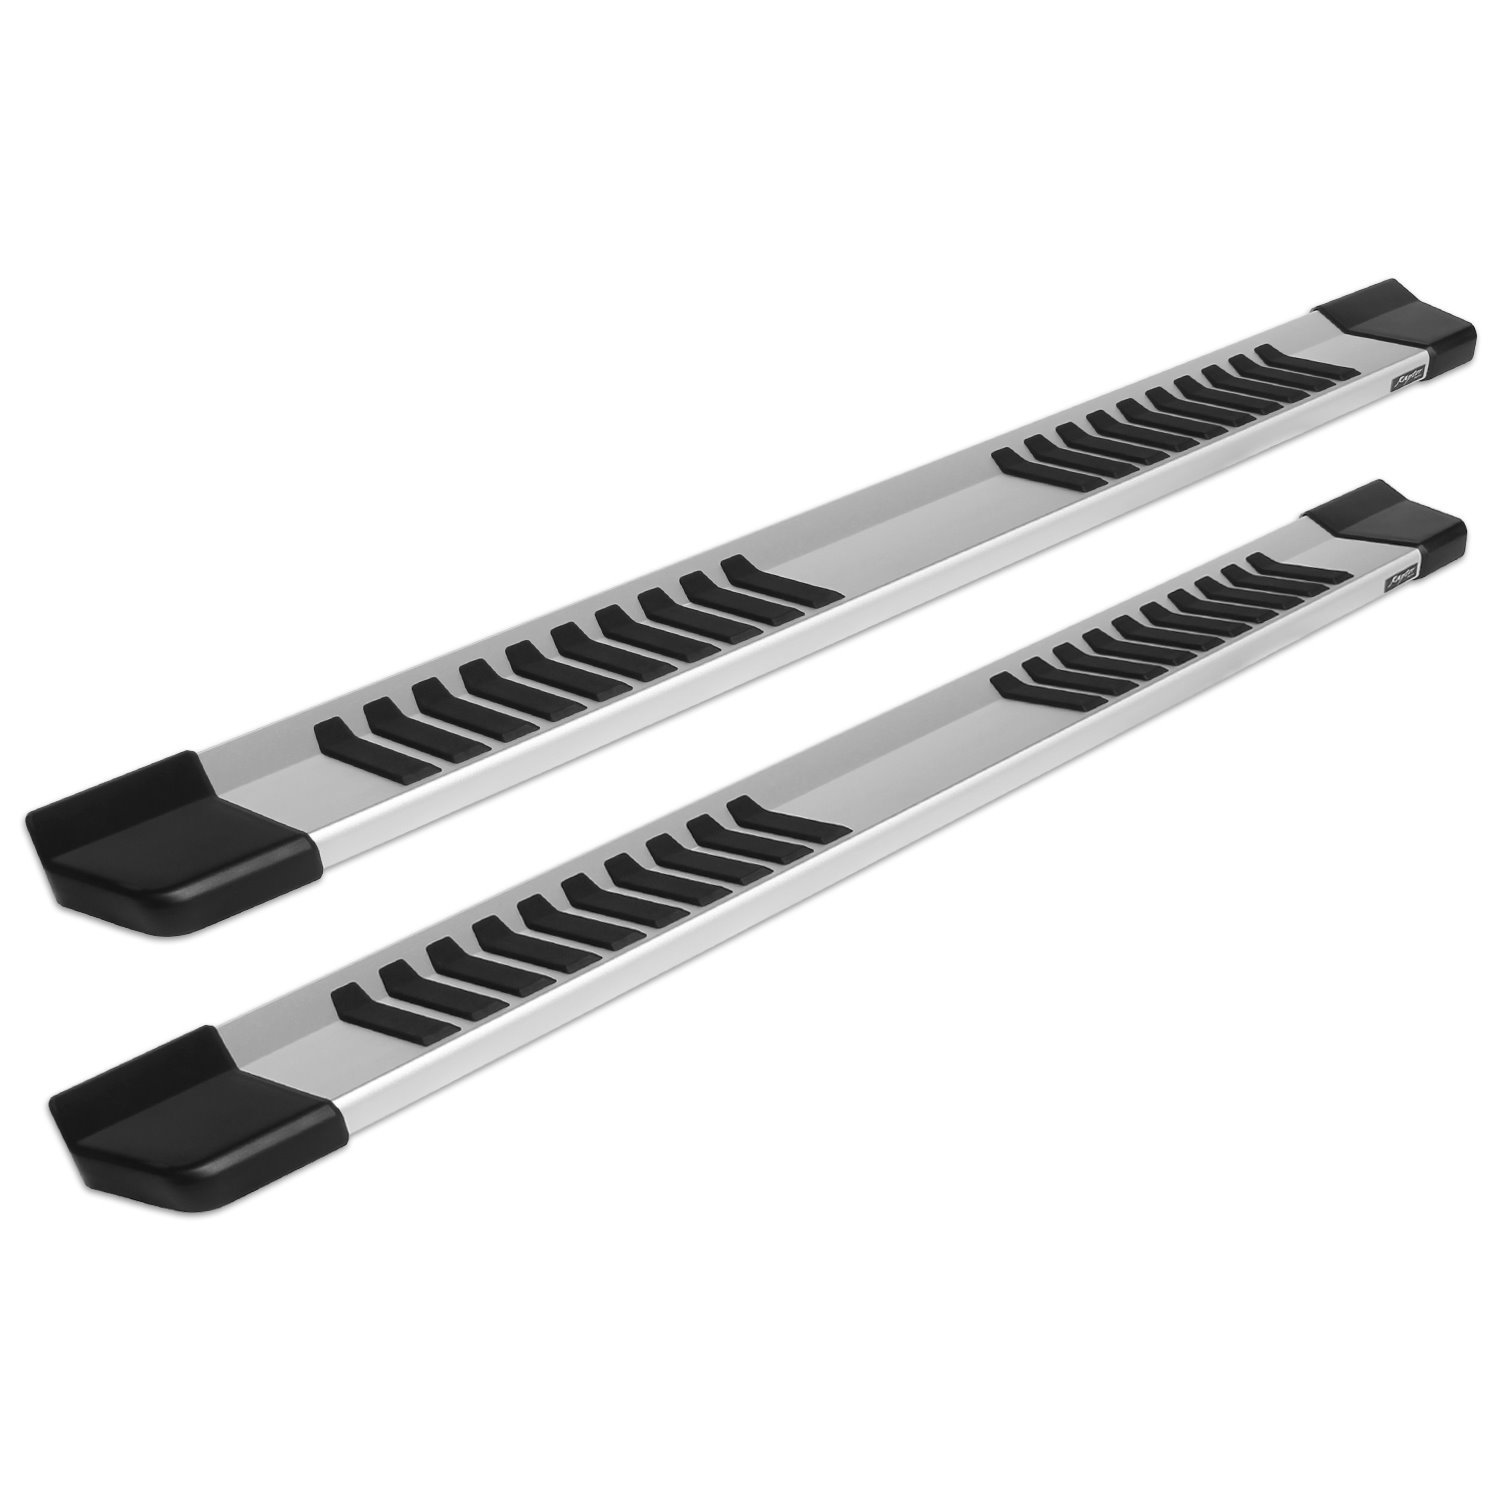 1701-0041 6 in OEM Style Slide Track Running Boards, Brushed Aluminum, Fits Select Chevy Silverado/GMC Sierra 1500/2500/3500